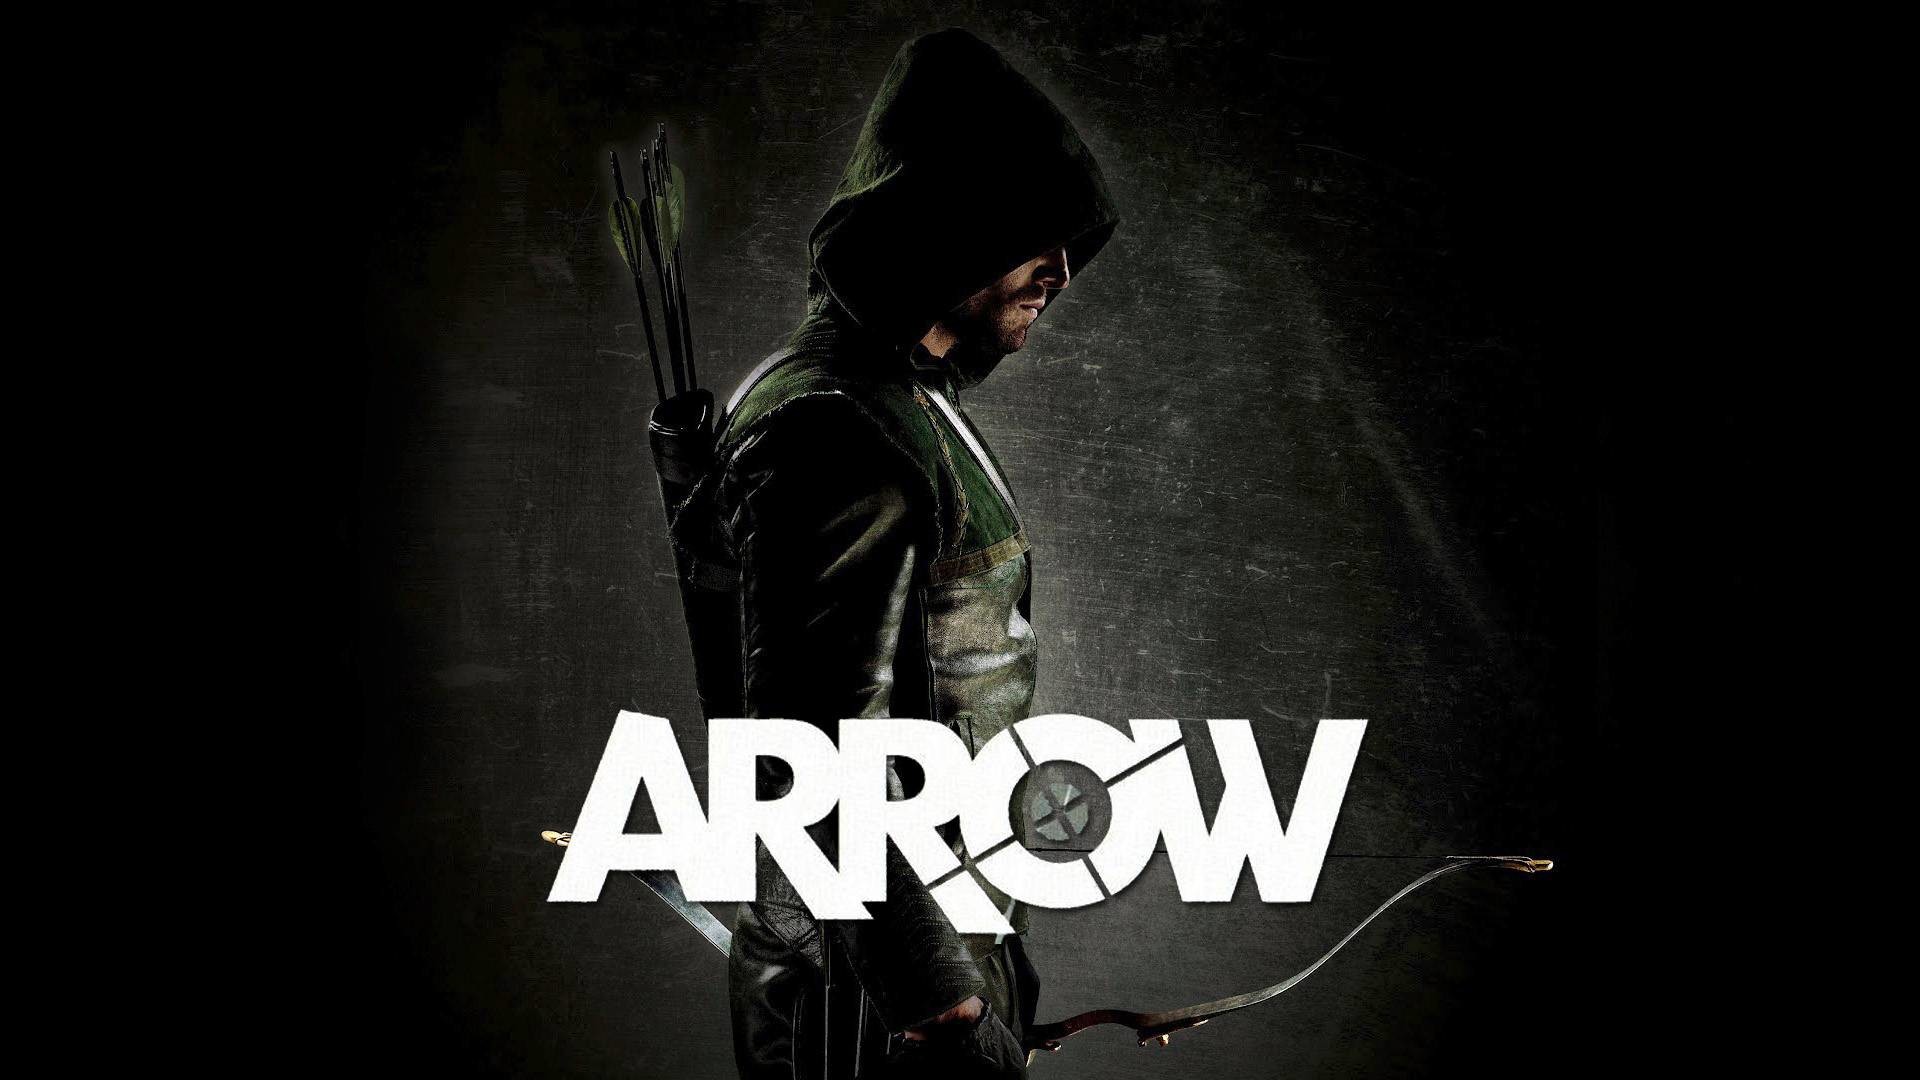 Arrow HD Images whb 9 #ArrowHDImages #Arrow #tvseries #wallpapers